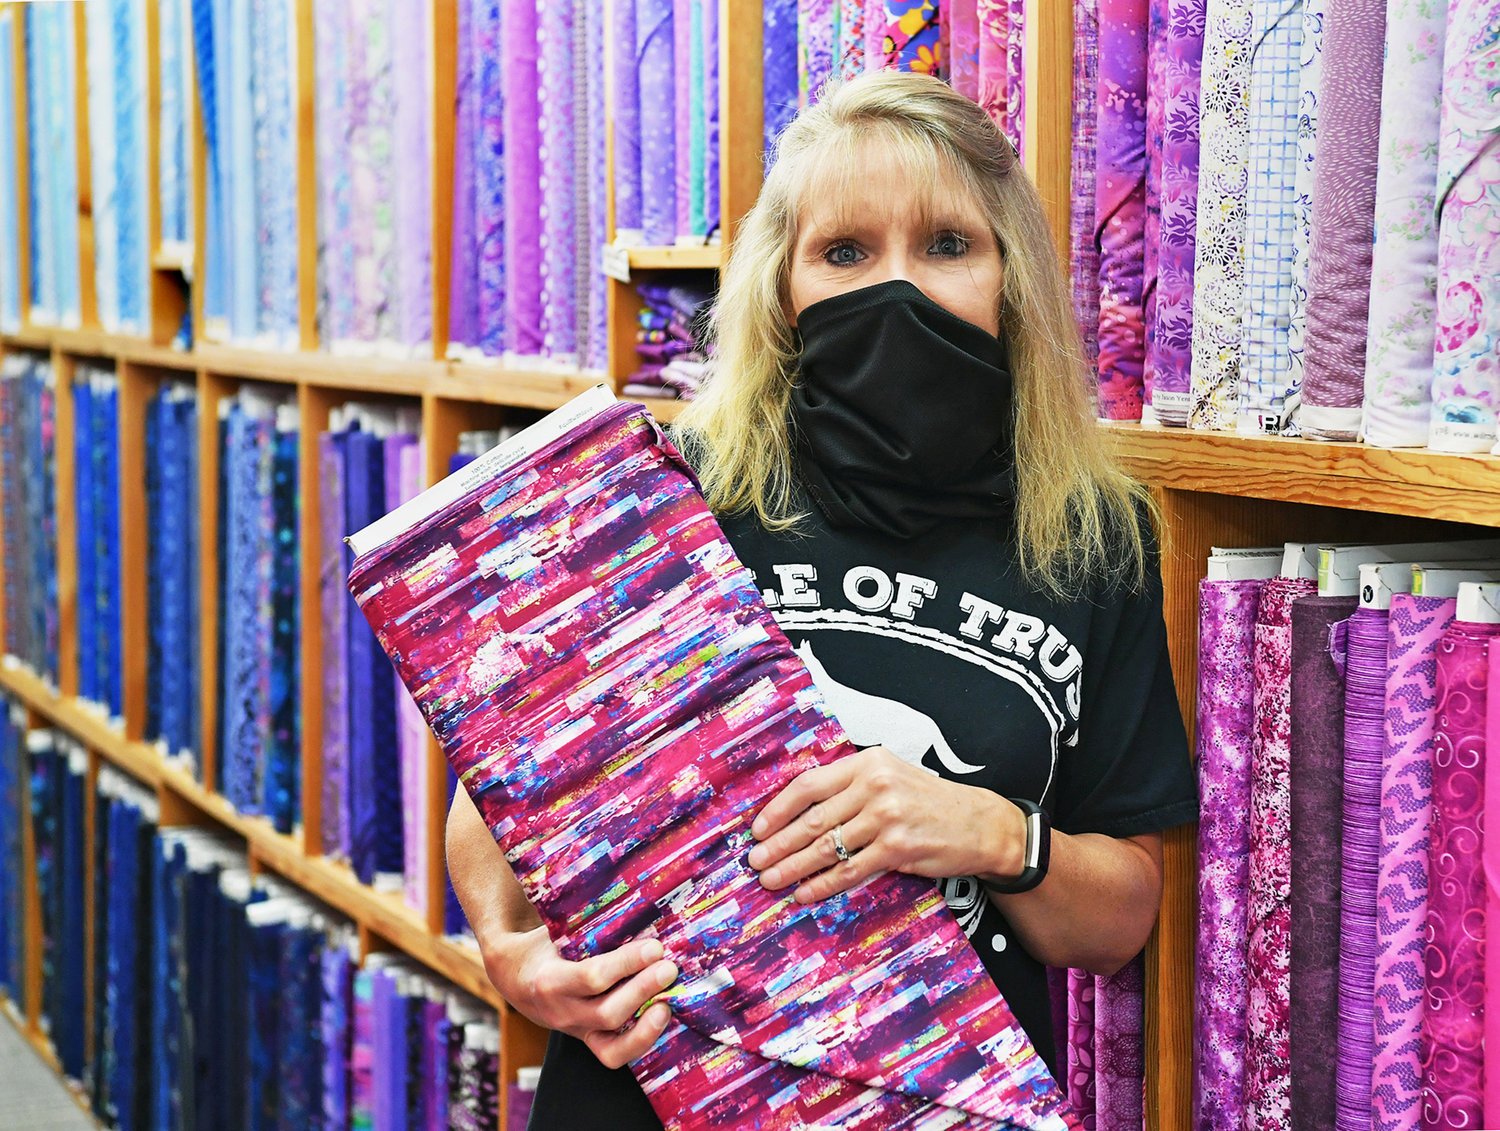 Candi Sullivan, 51, has managed Gee-Gee's Quilting Inc. for the past 25 years. Here she displays a bolt of colorful cloth in the store on Friday, July 17.